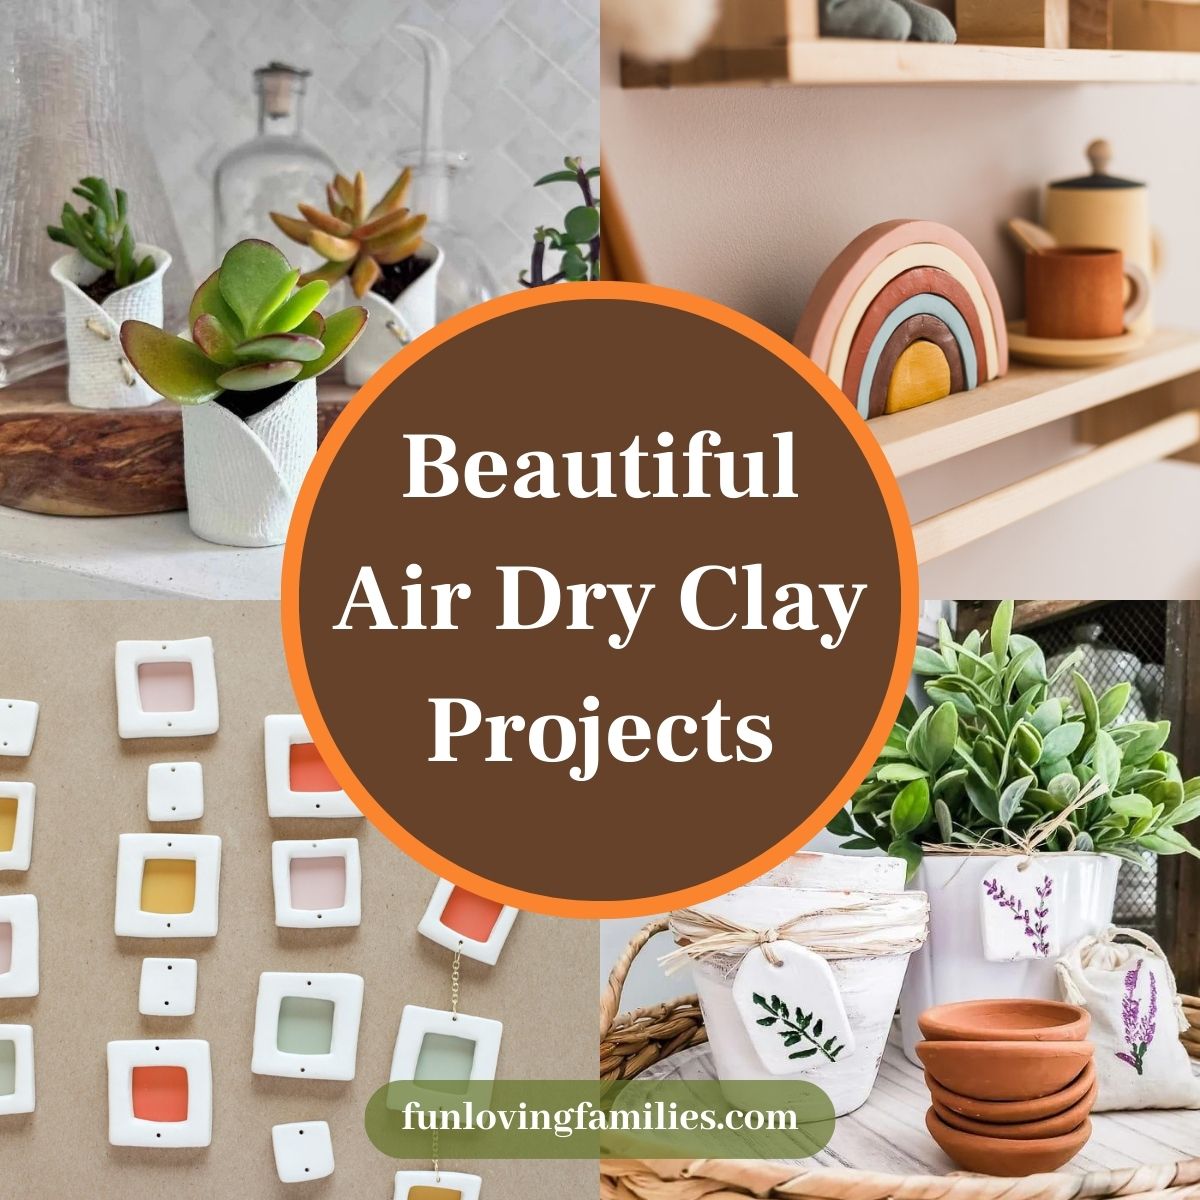 Things to Make with Air Dry Clay: Fun and Beautiful Projects